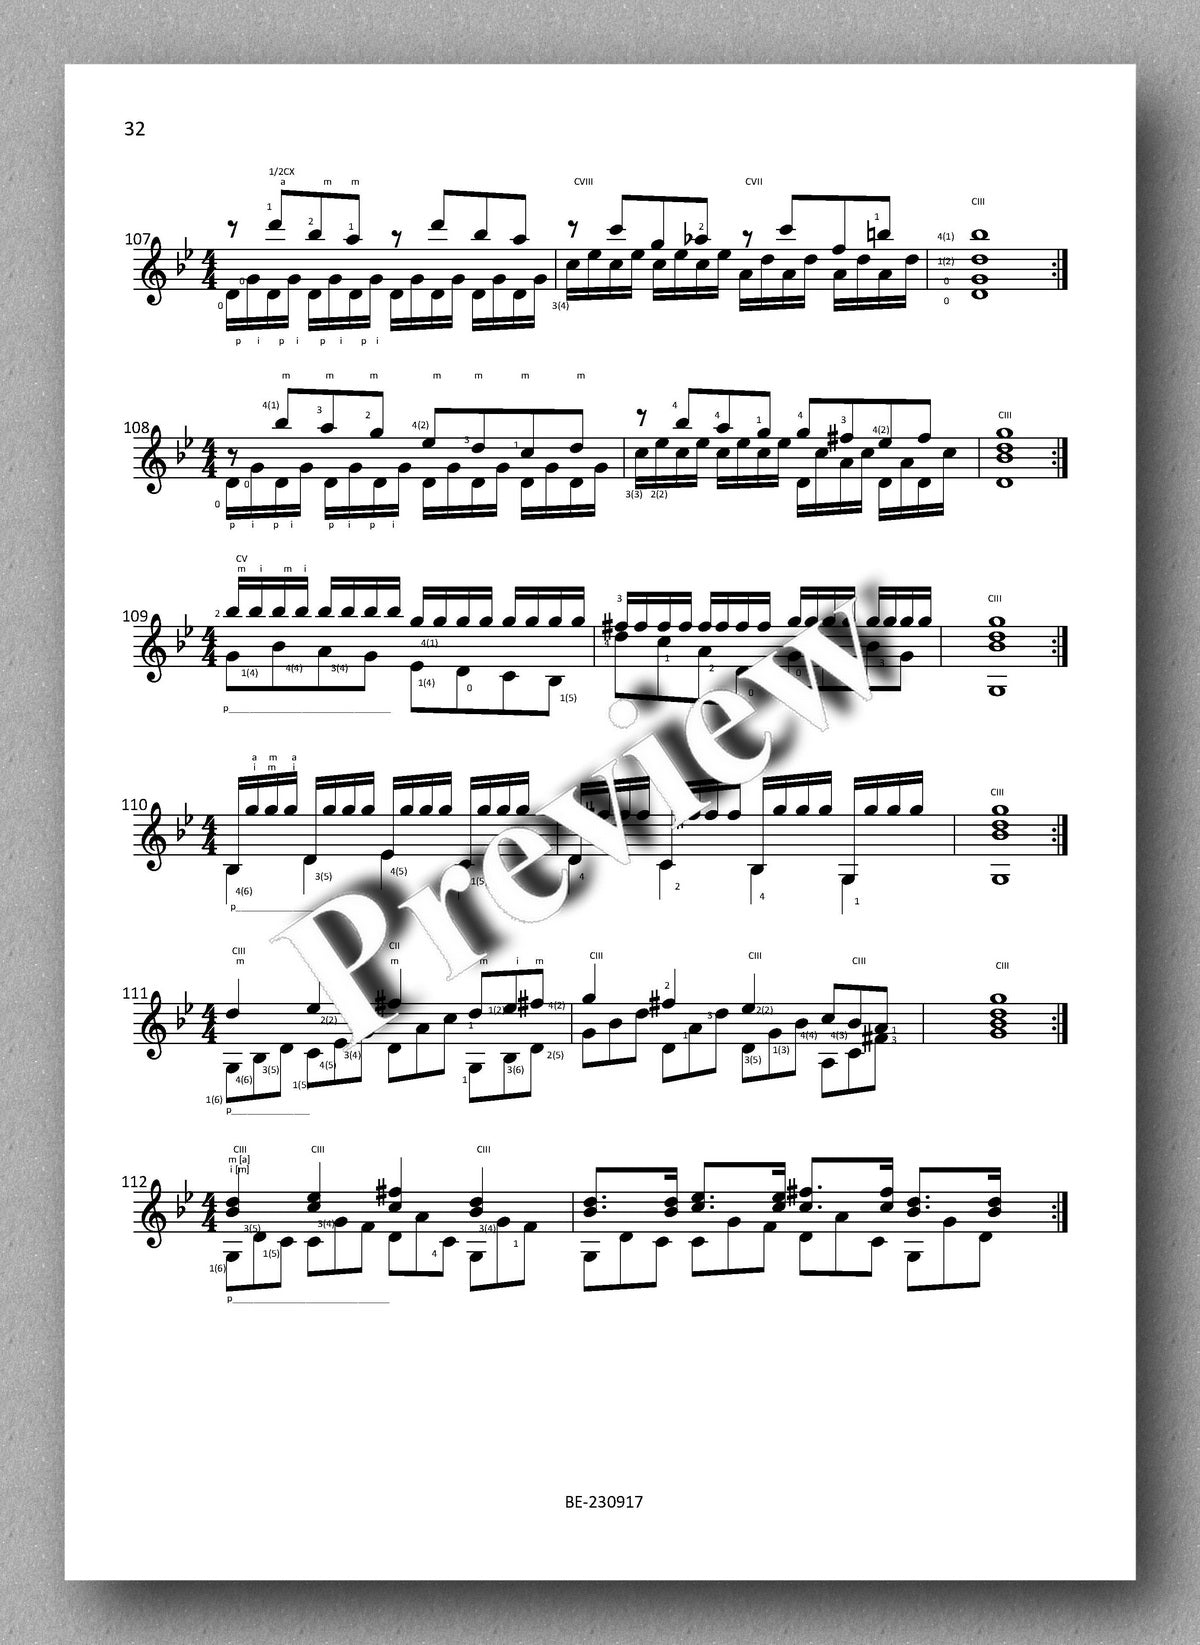 Giuliani, 120 Studies for the Guitar - preview of the music score 4